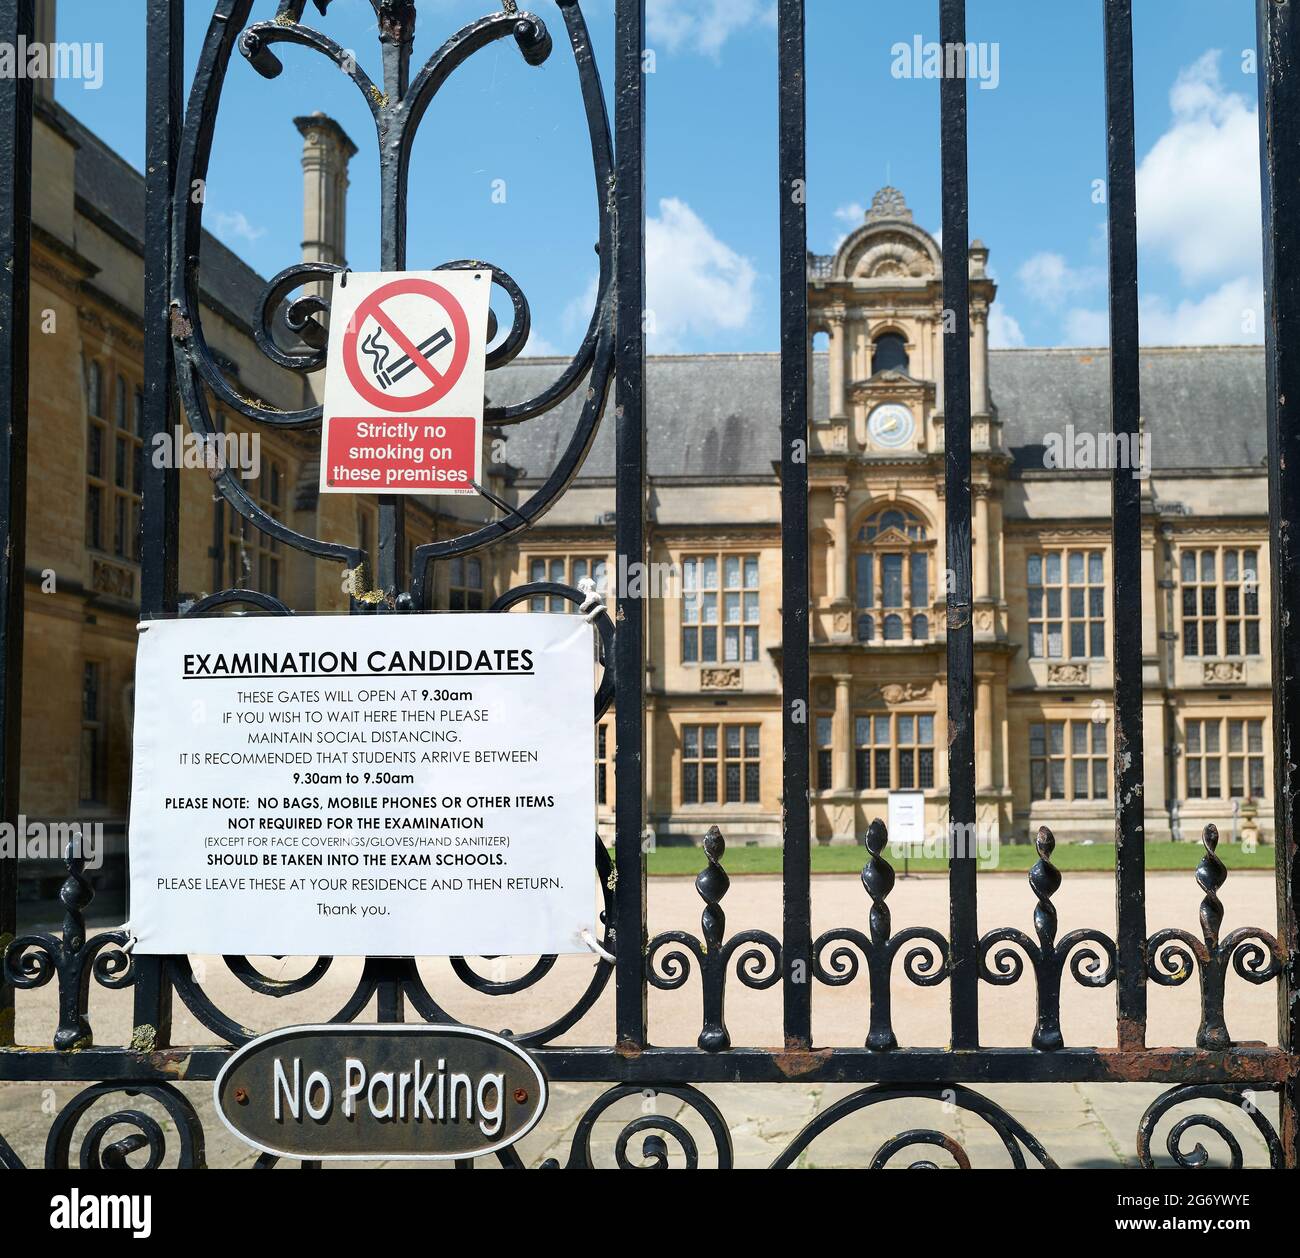 Notice to examination candidates about social distancing at the locked gates of the Examinations Schools,  university of Oxford, England, June 2021. Stock Photo